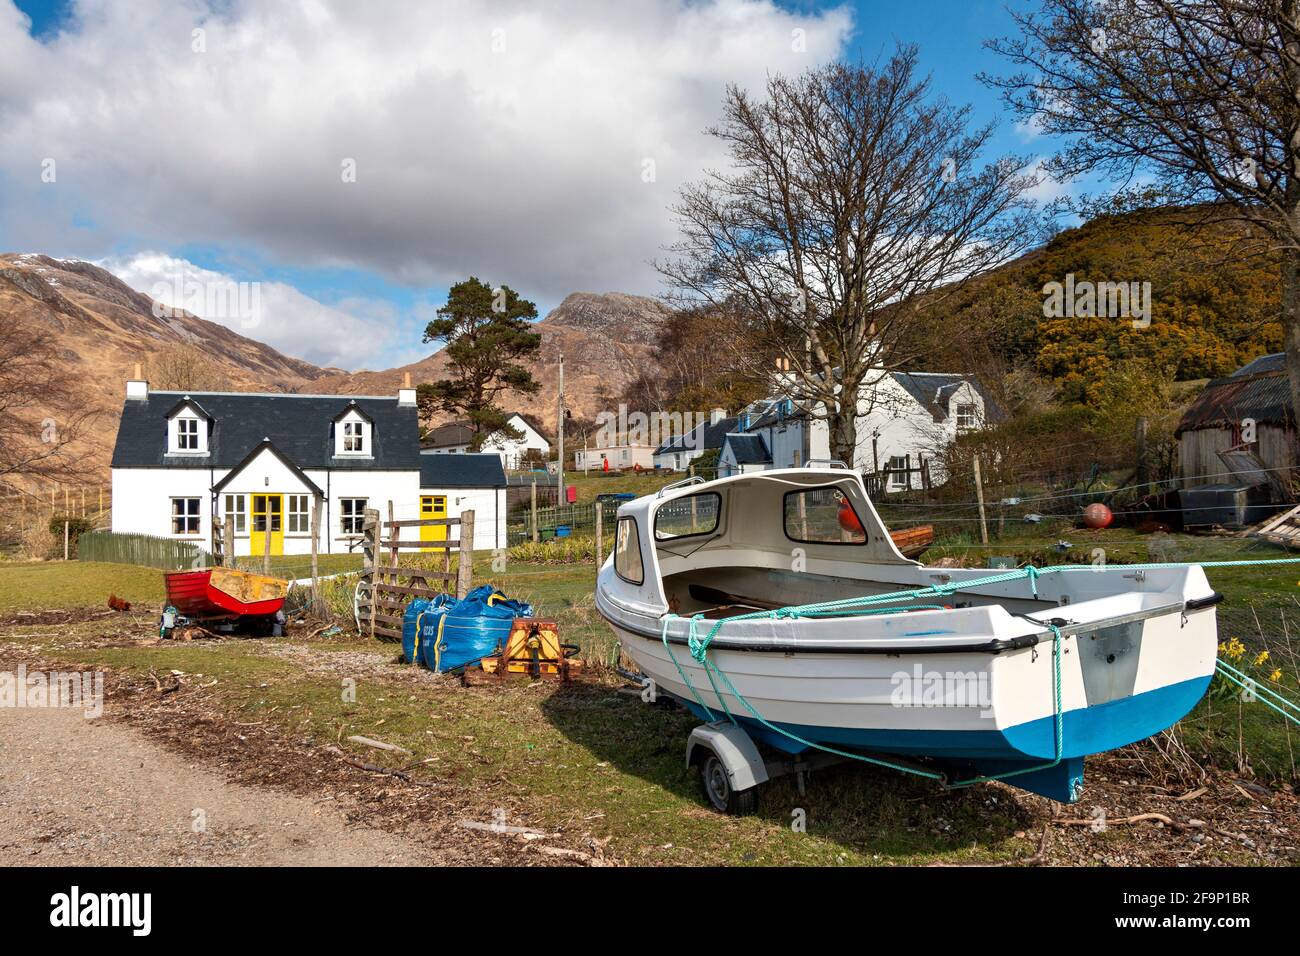 GLENELG HIGHLANDS SCOTLAND CORRAN VILLAGE HOUSES AND FISHING BOATS ON THE BANK OF THE RIVER ARNISDALE Stock Photo